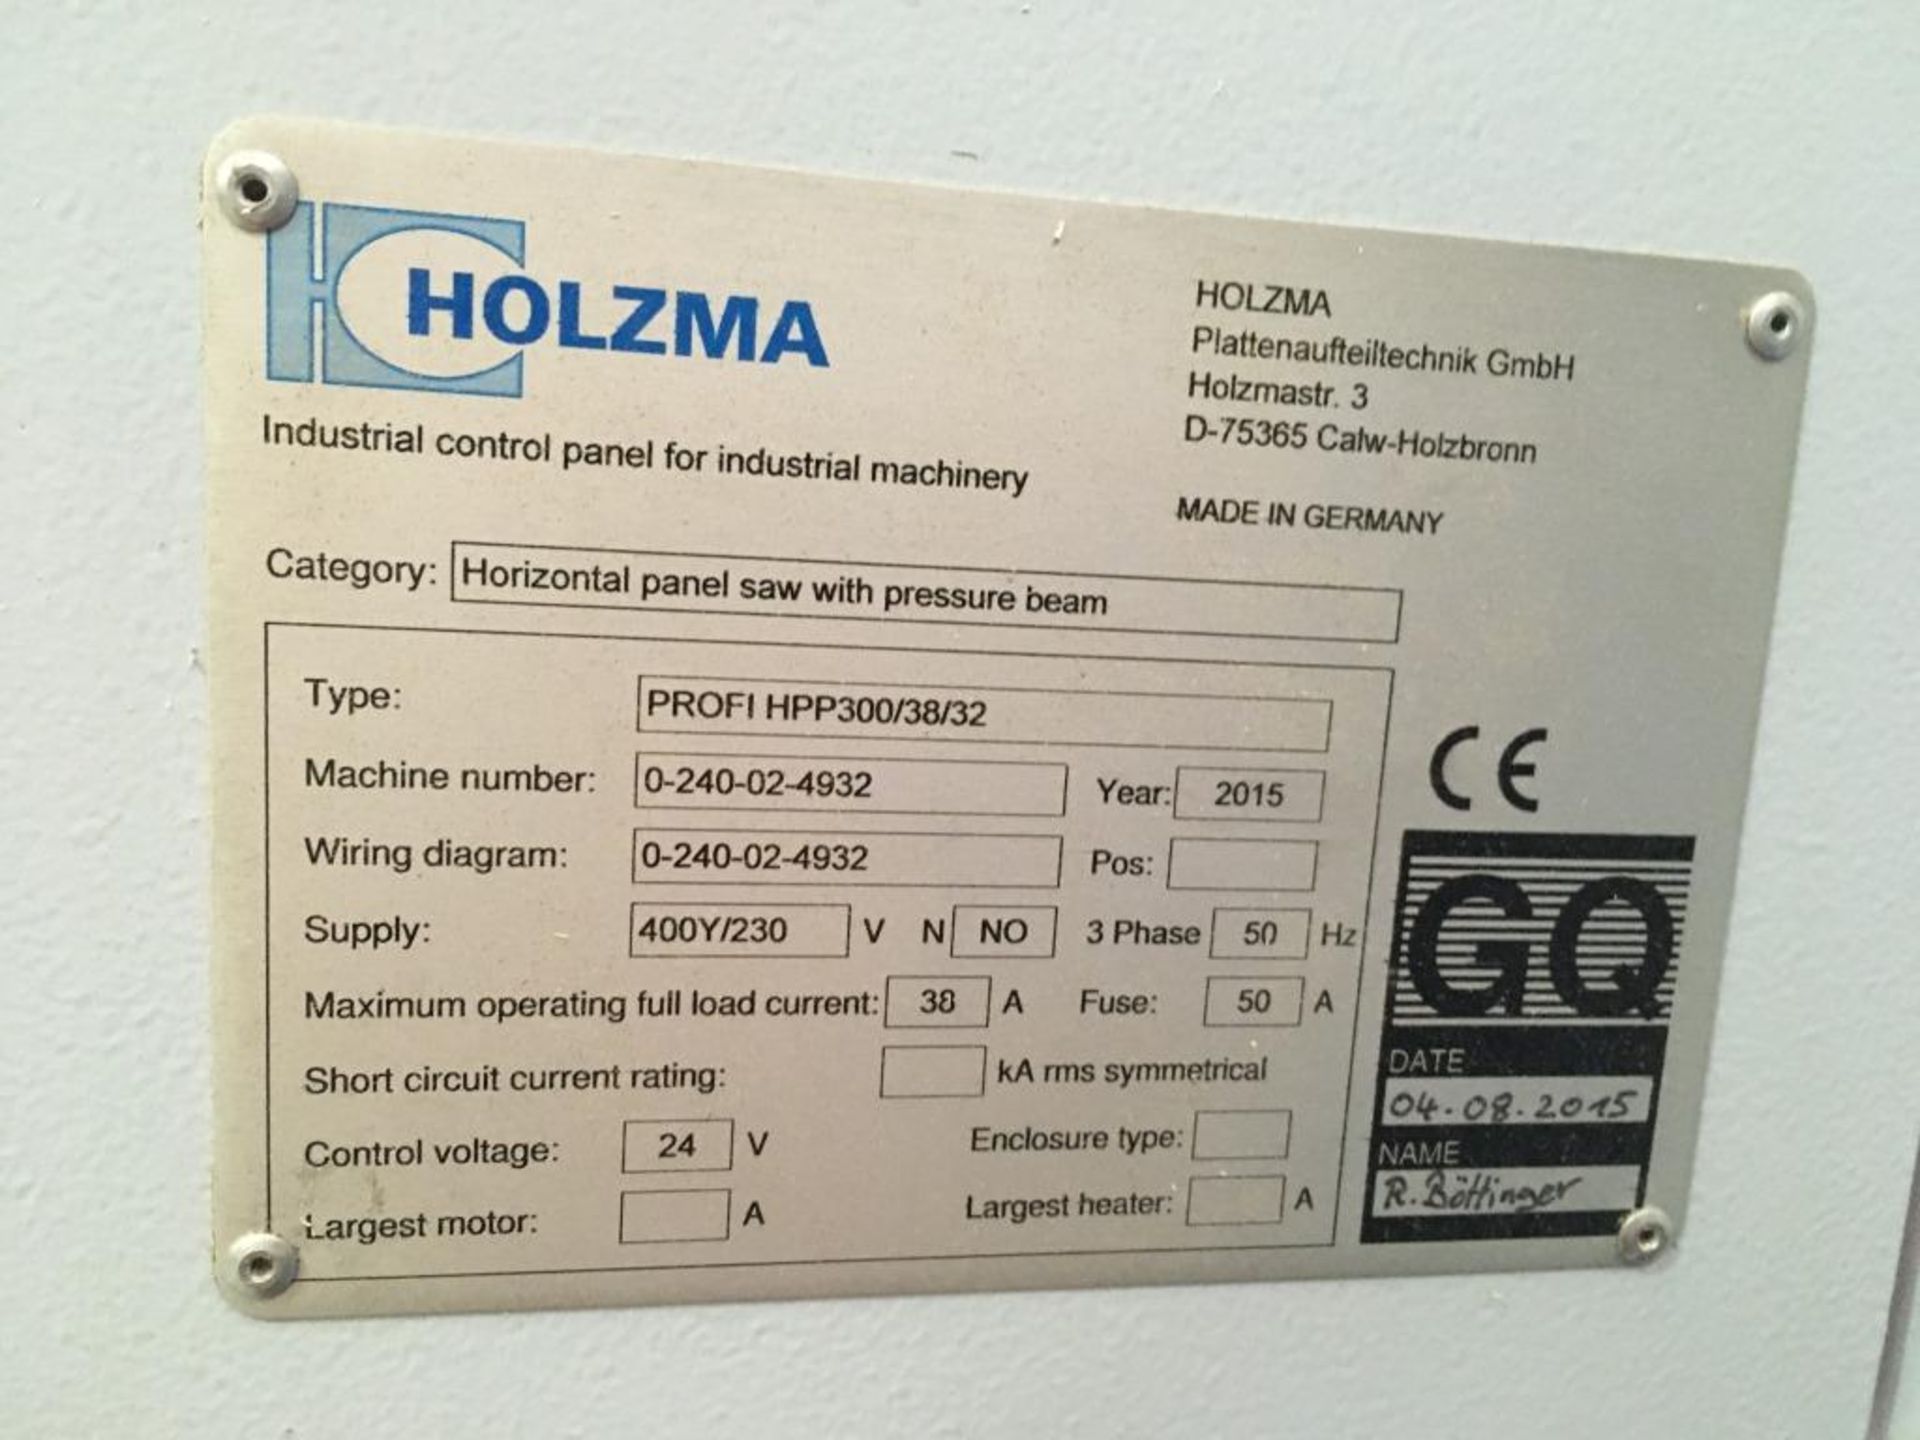 Holzma HPP300 profiLine panel saw, Type: HPP300/38/32, Serial No. 0-240-02-4932, Year of - Image 9 of 12